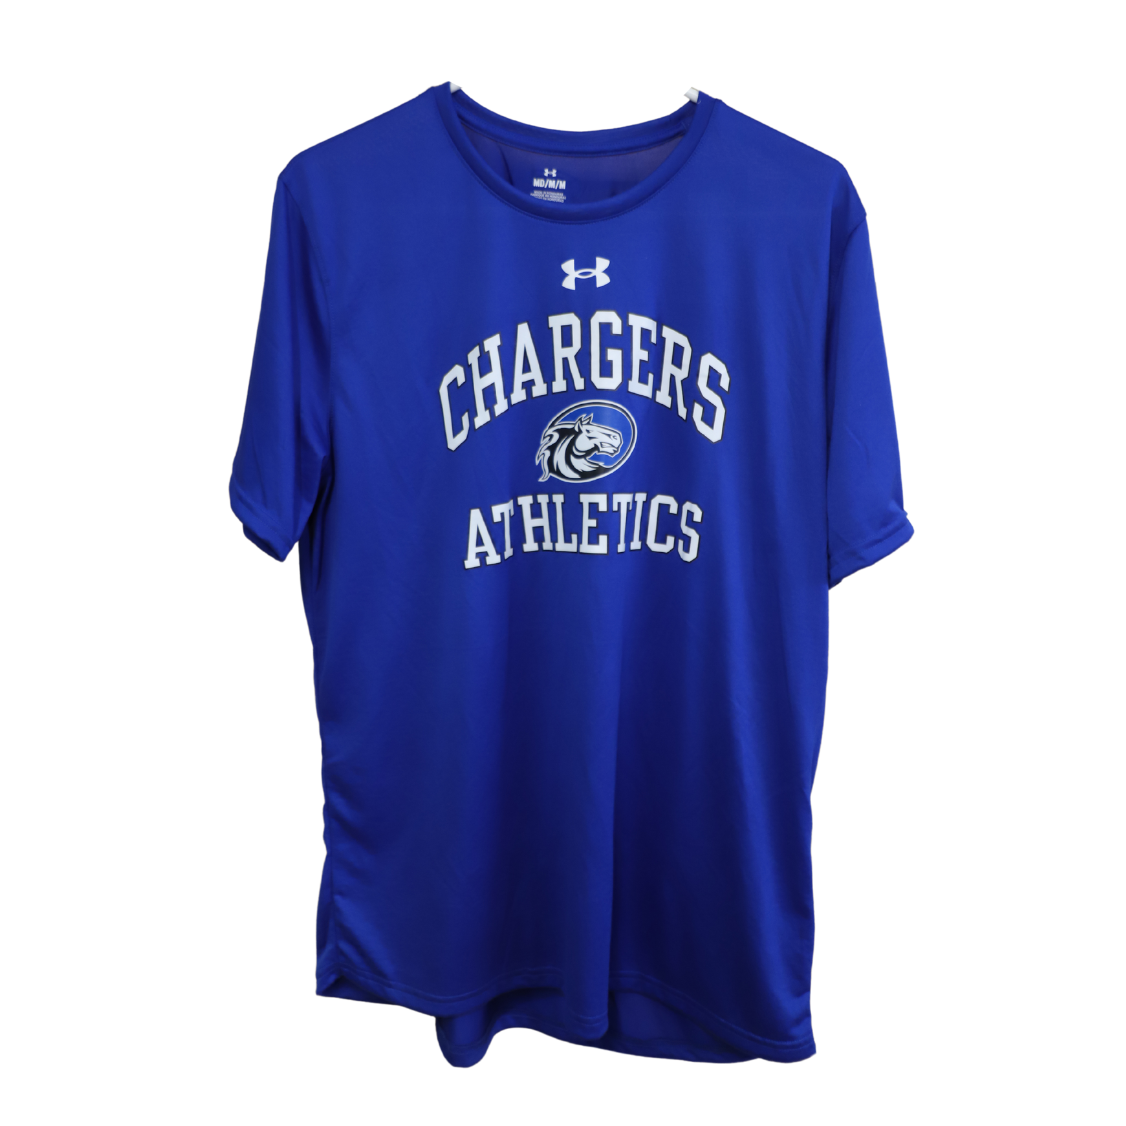 Under Armour SS Performance Tee, Royal